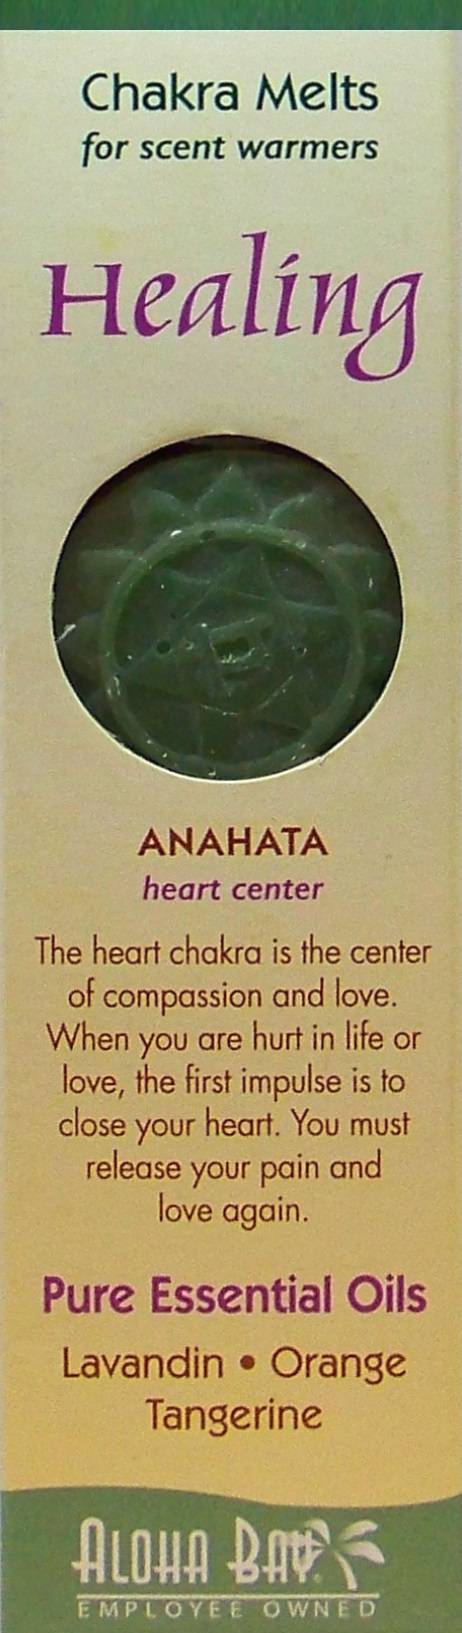 healing heart chakra candle melt, green scented candle from aloha bay